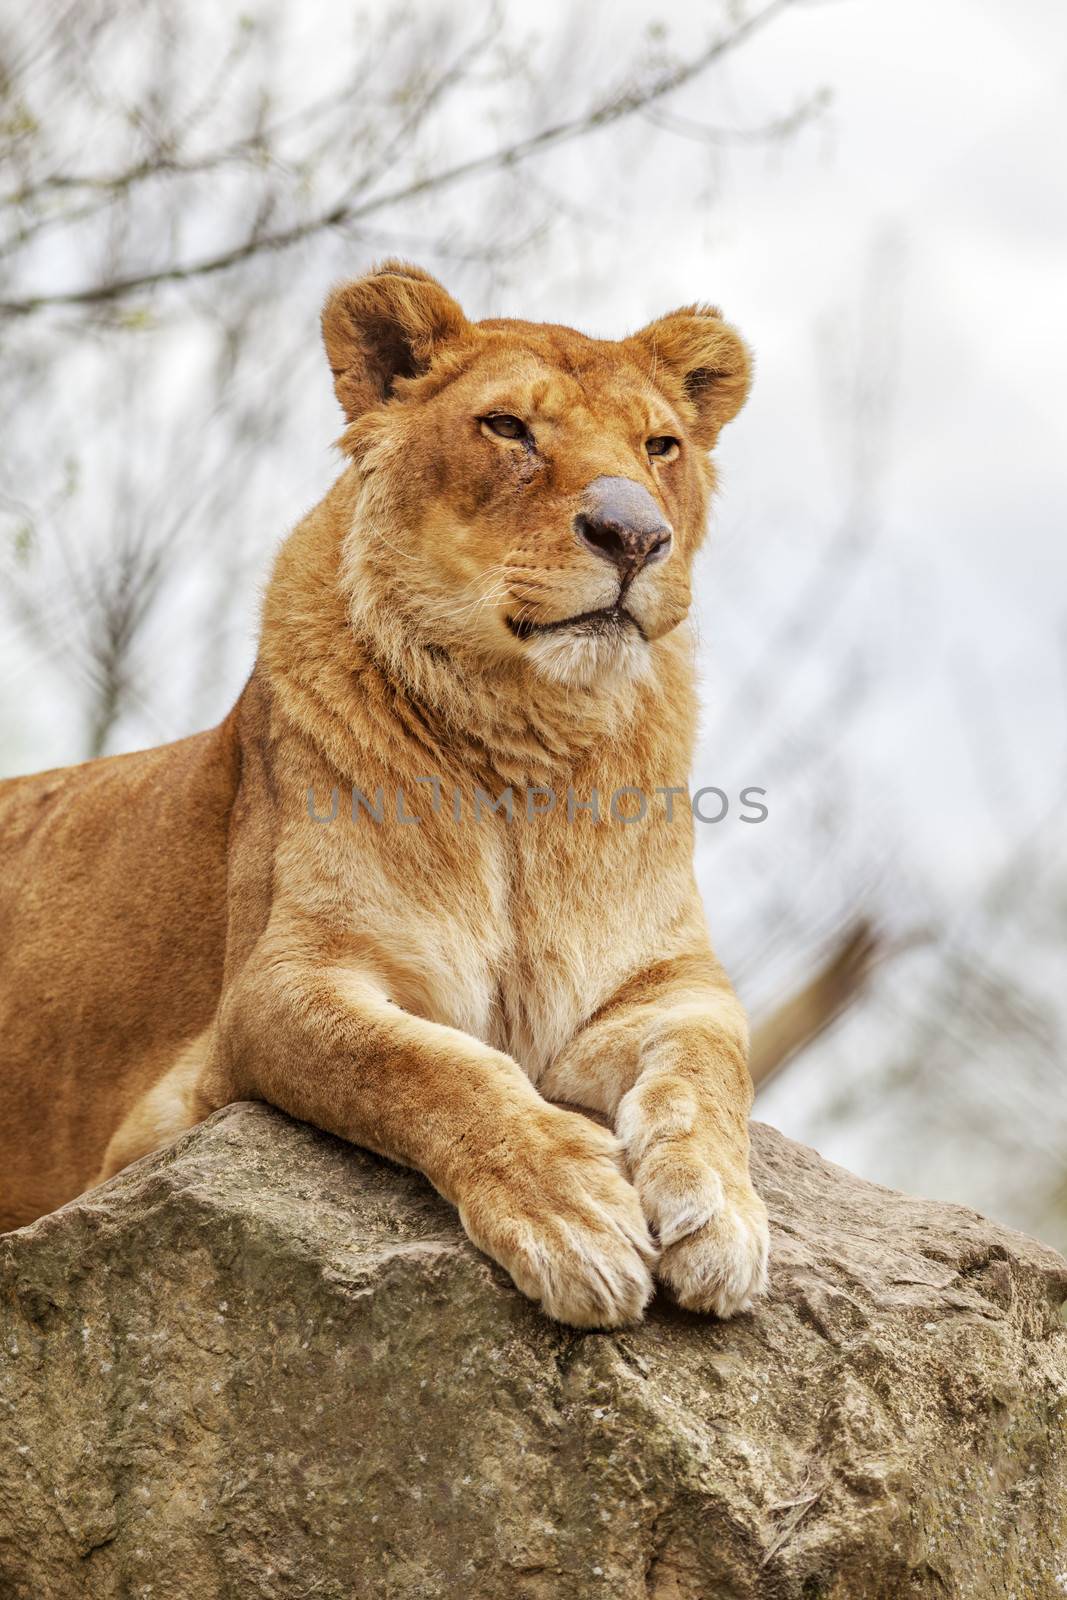 Lioness resting on a rock